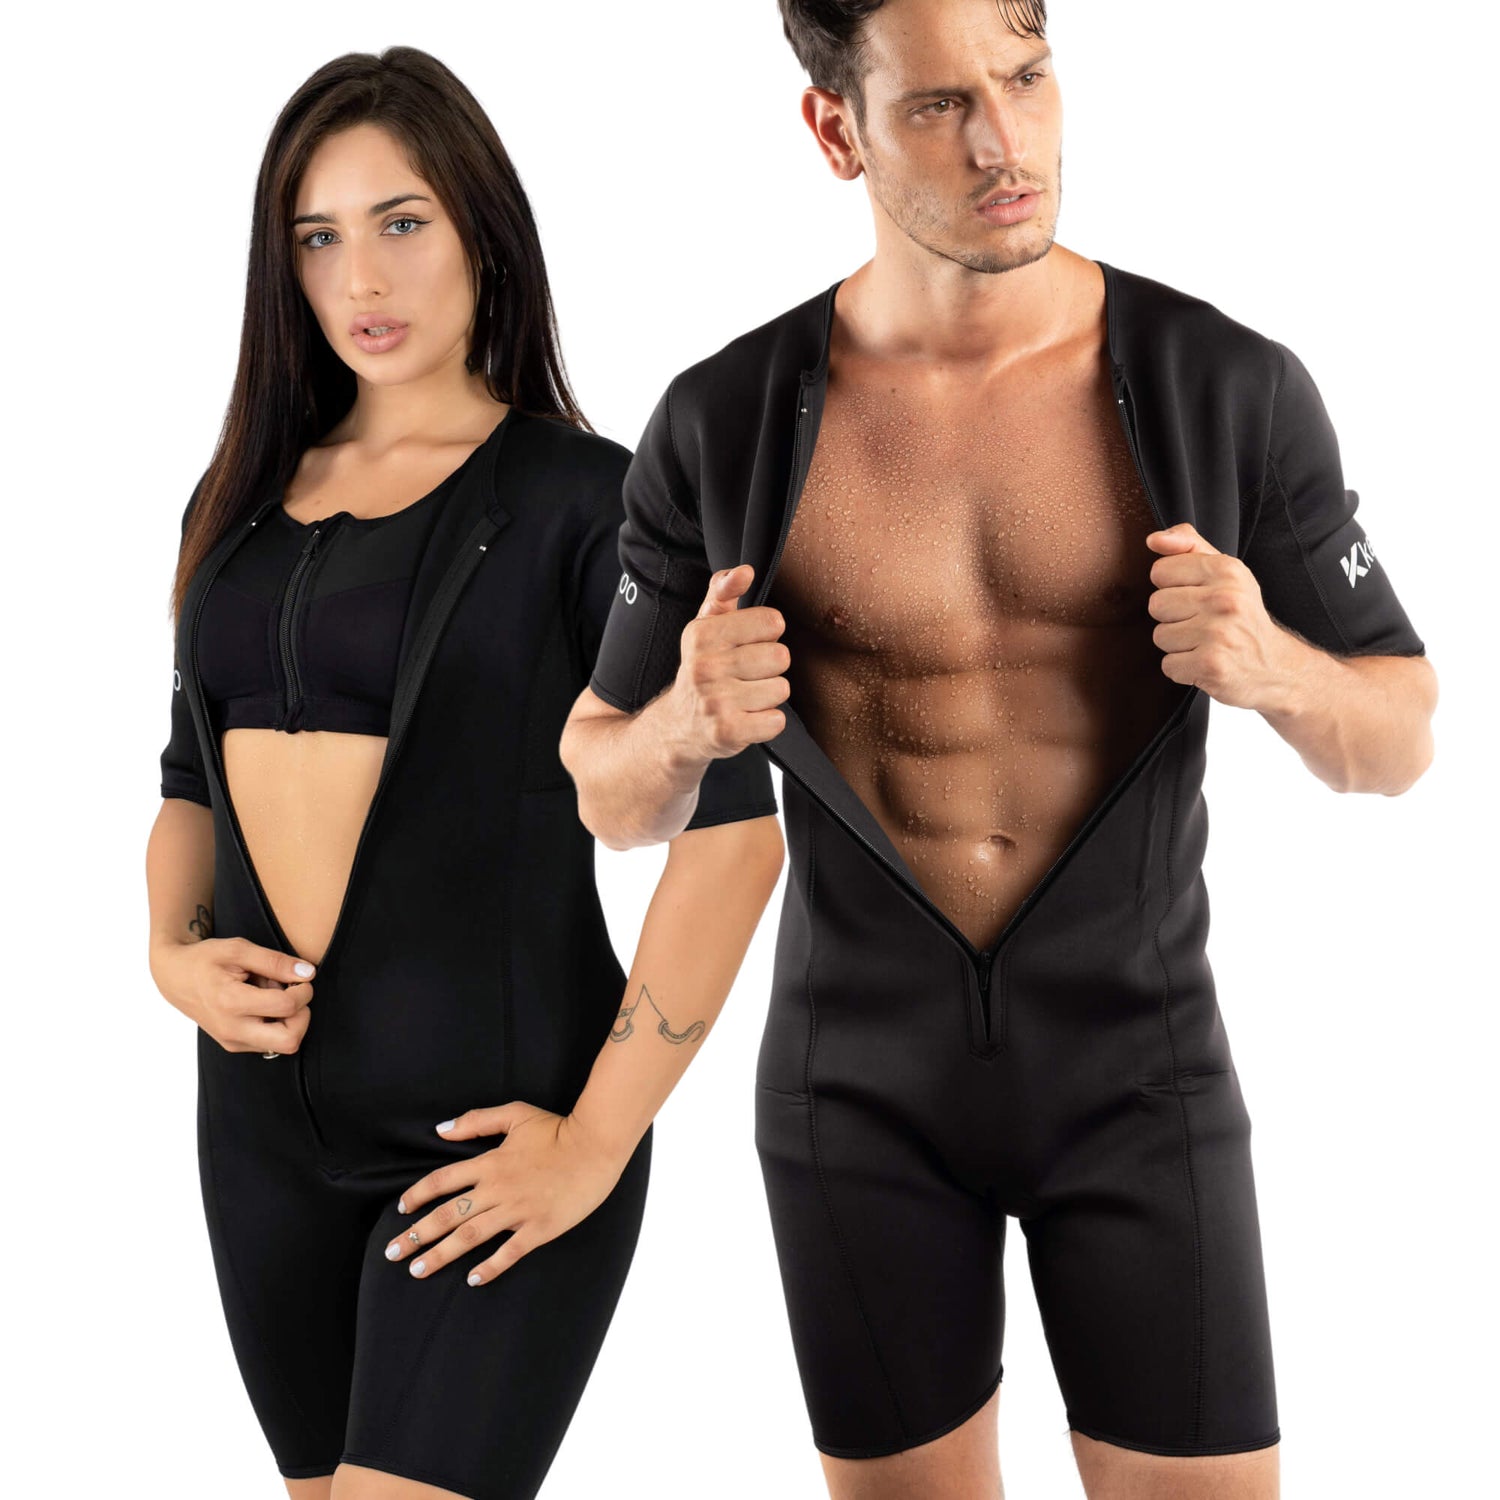 Skelcore Performance Sauna Suit, Available in Small/Medium, Large, Extra  Large, Promotes Weight Loss